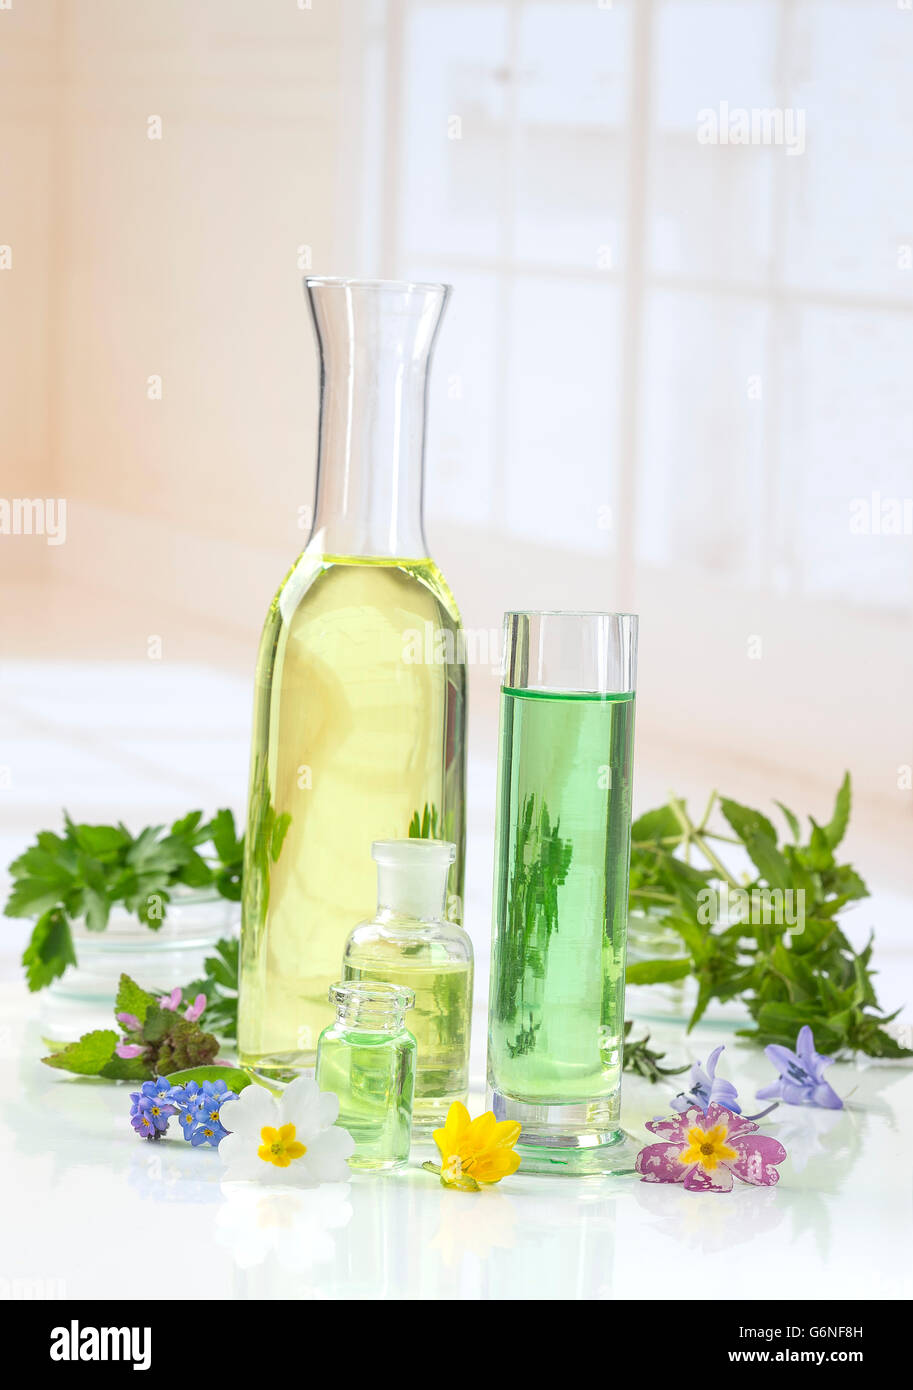 essential oils for aromatherapy treatment with fresh herbs Stock Photo